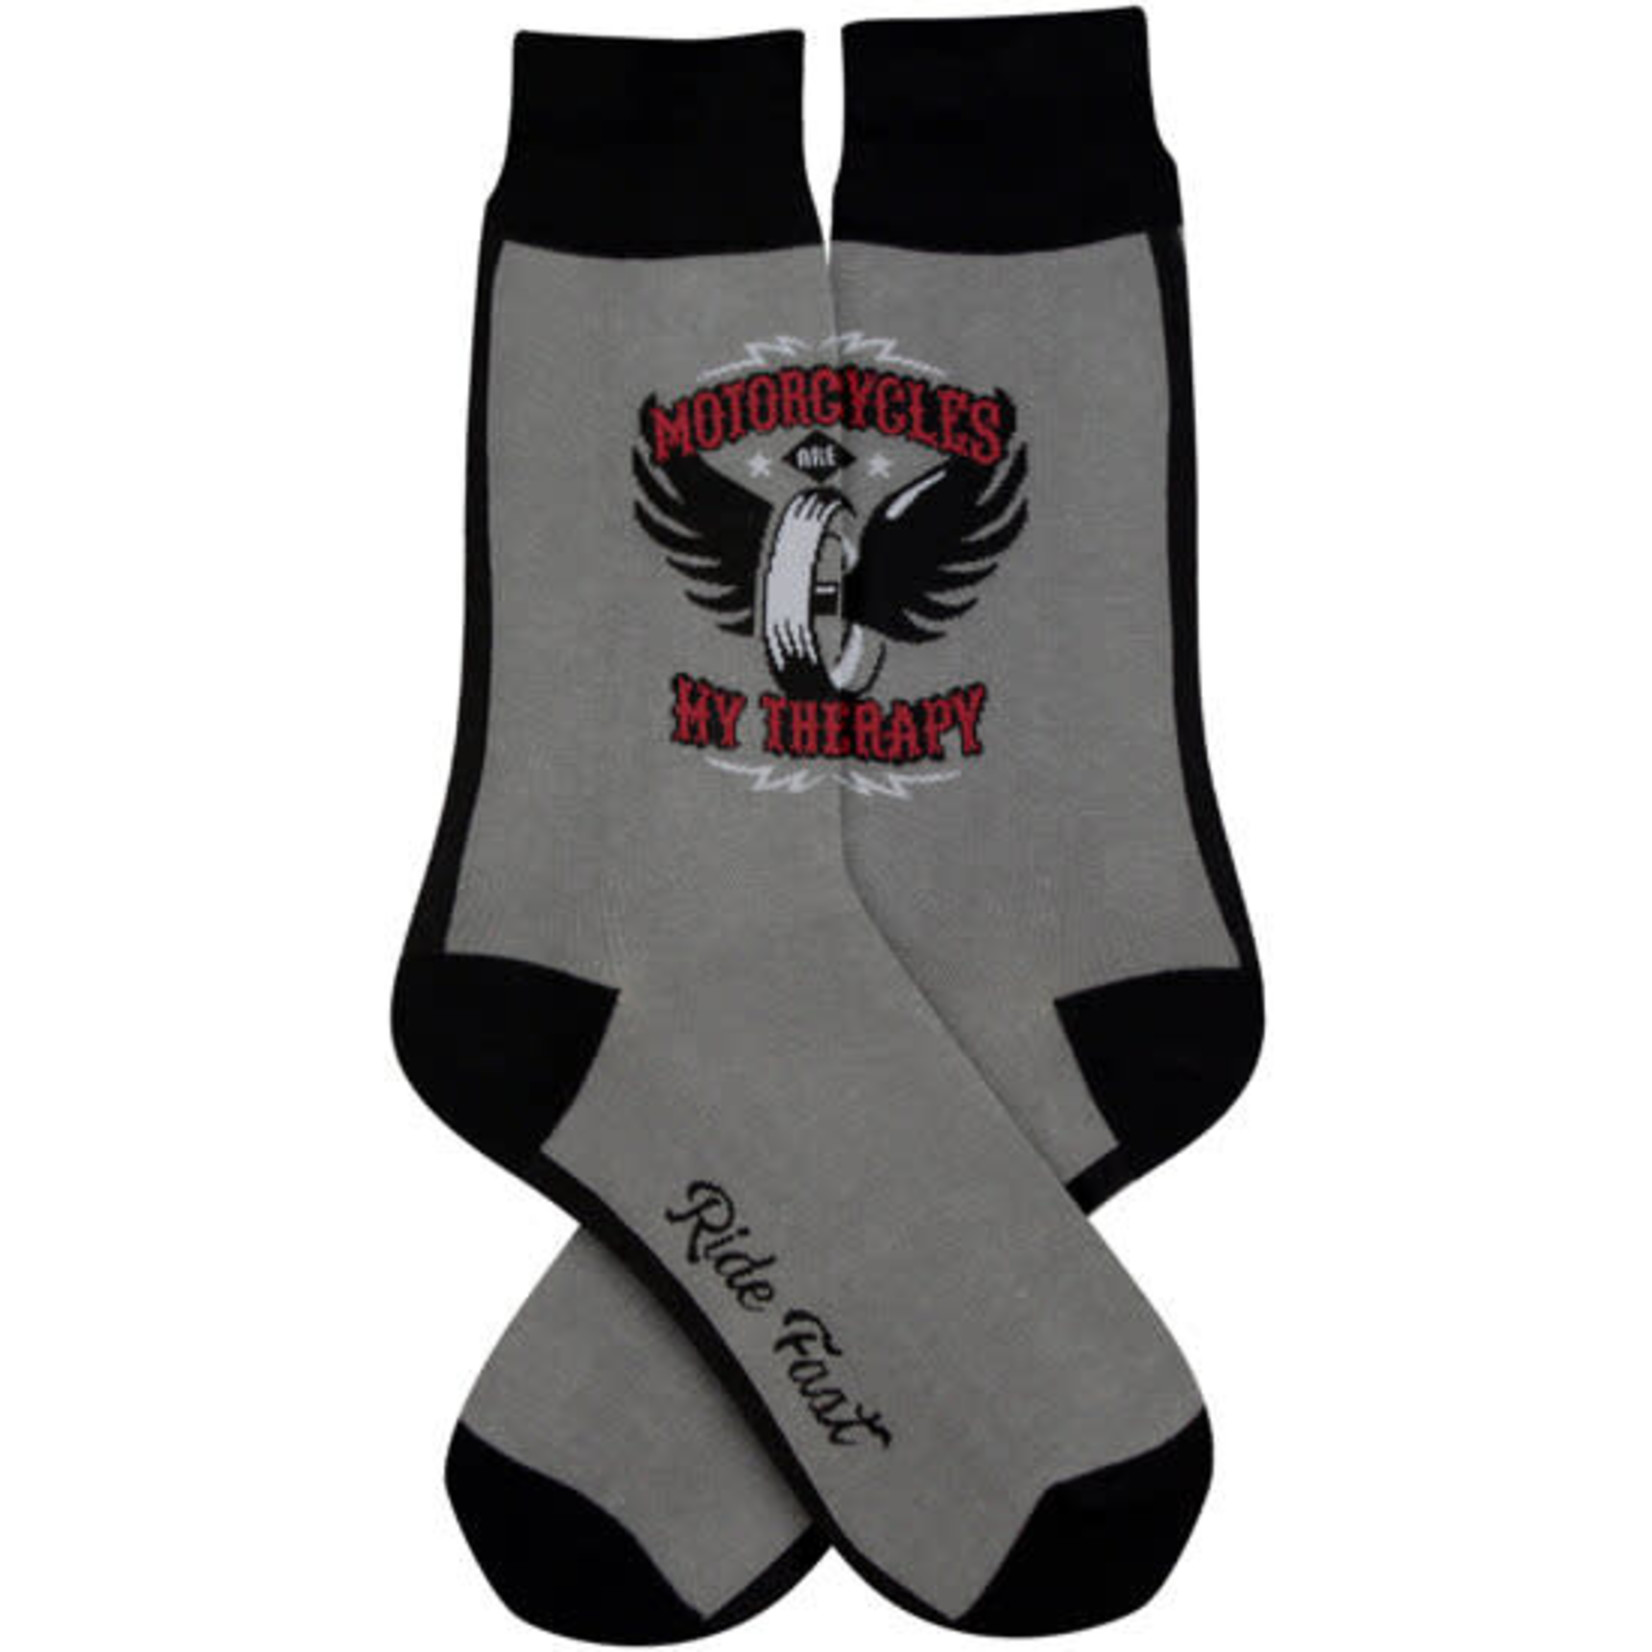 Socks (Mens) - Motorcycles Are My Therapy